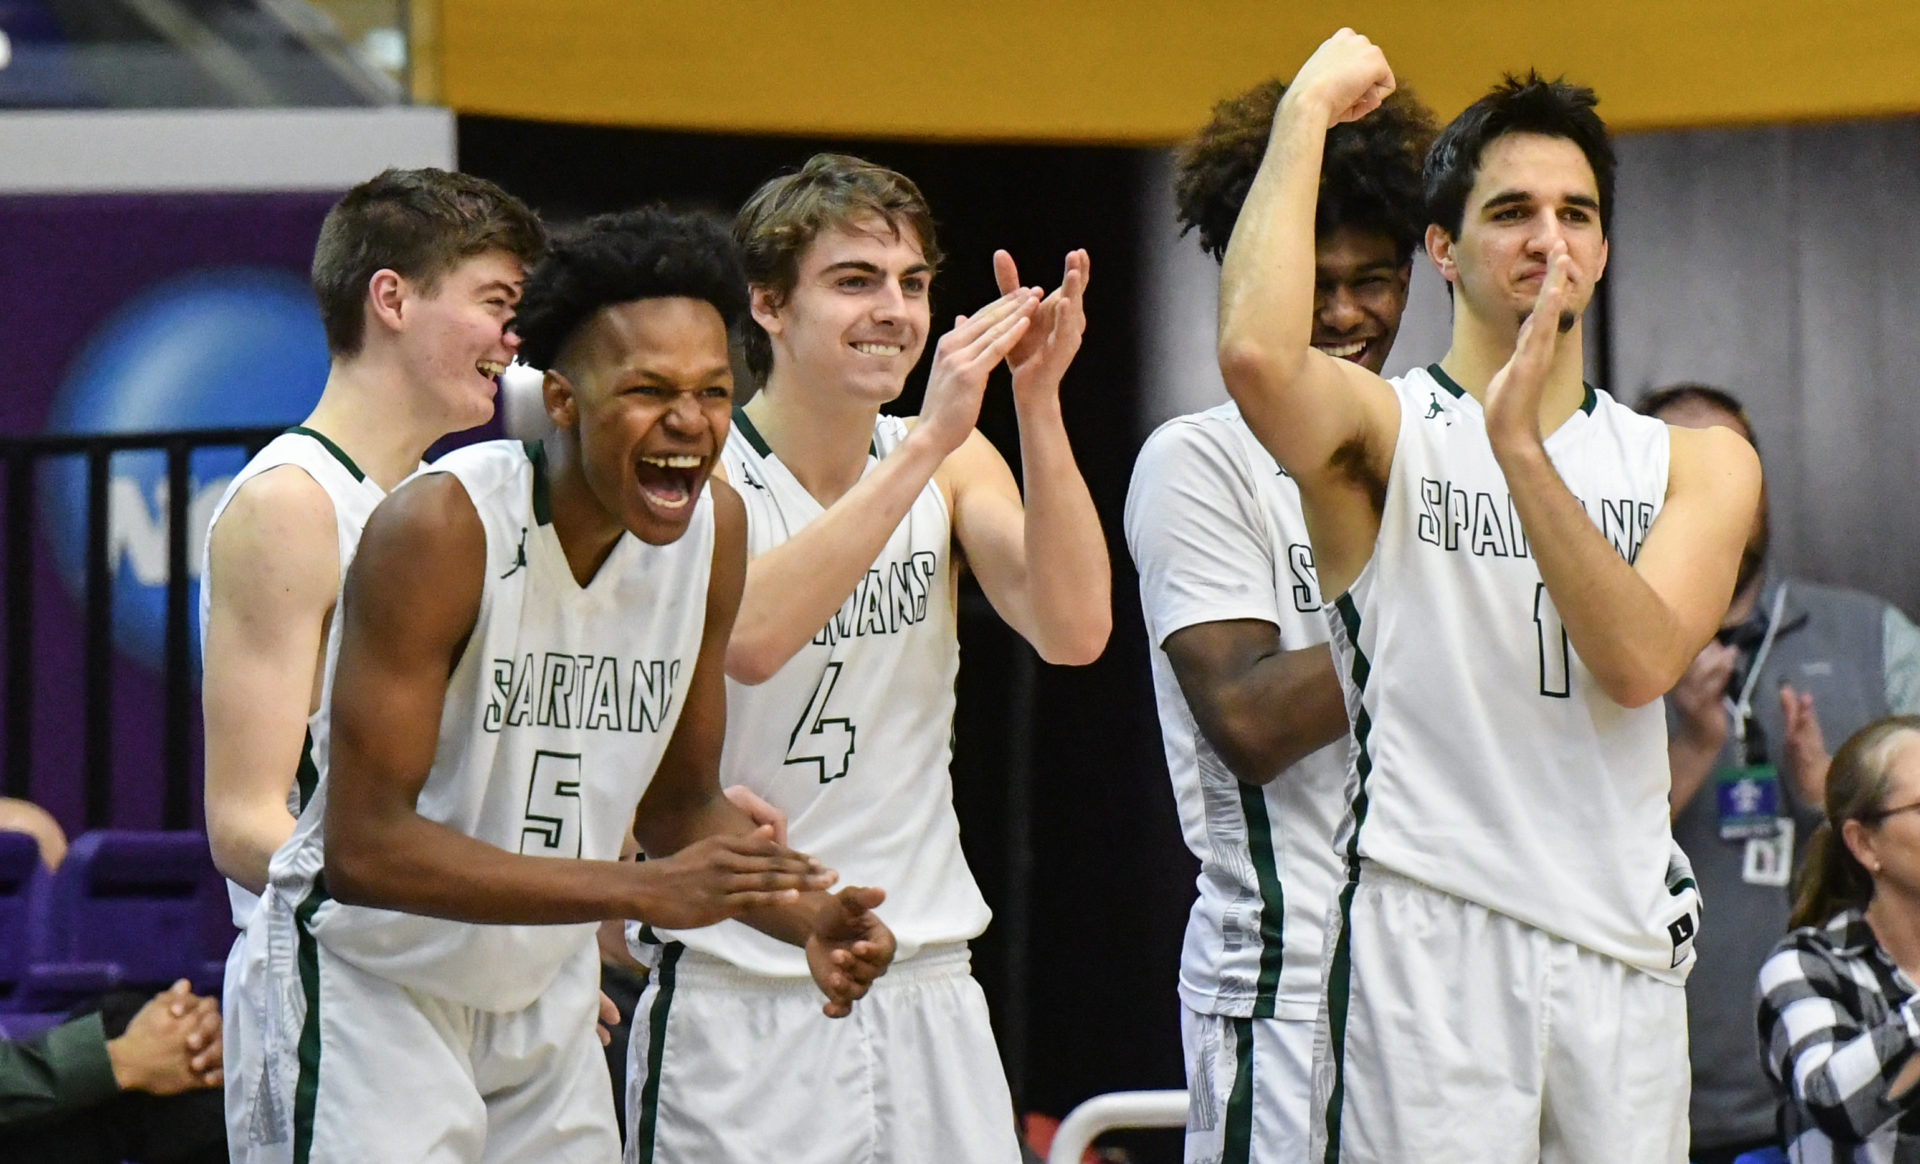 PLAYOFF RESET What to look for next in the high school basketball